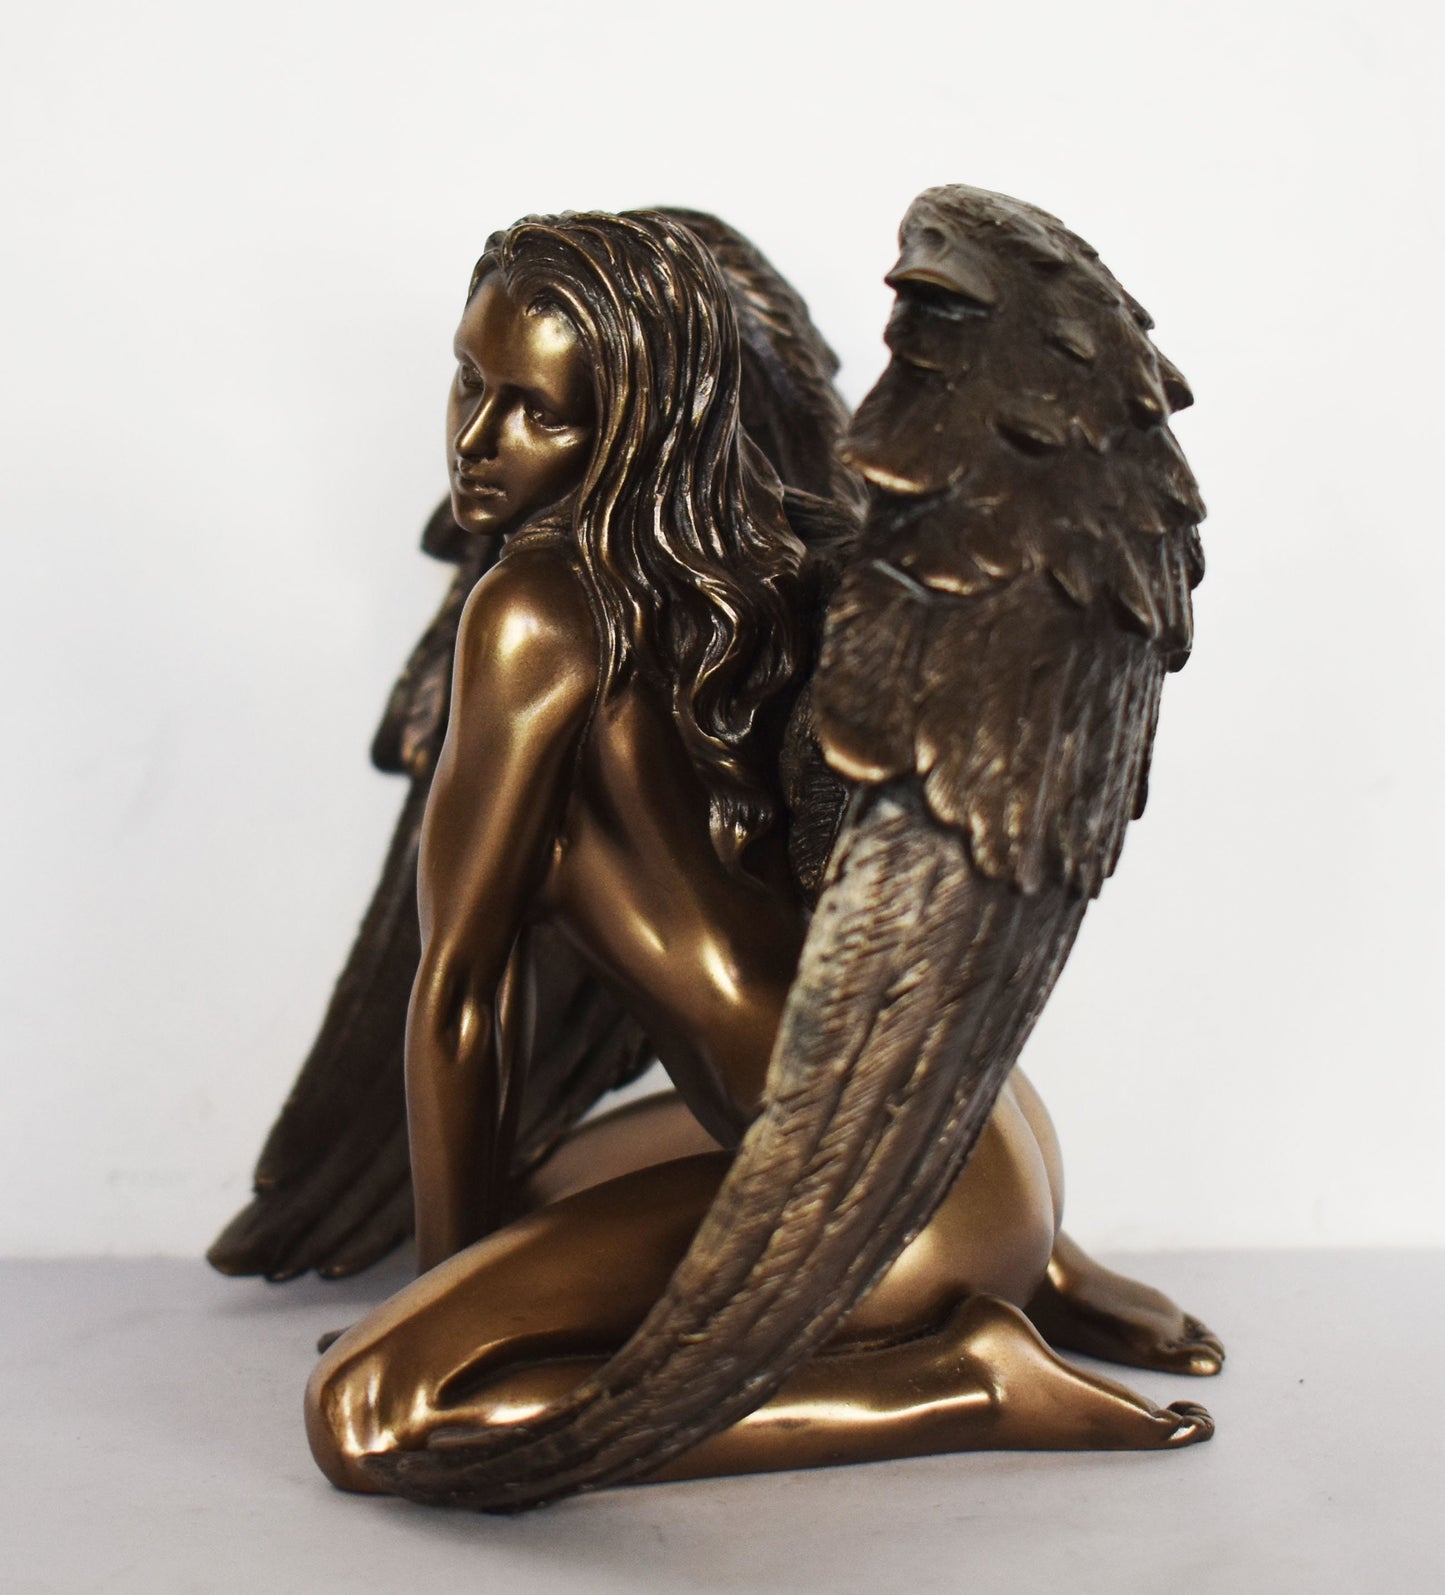 Lilith - Adam's First Wife - Female Demon - Sexually Wanton - Represents Chaos, Seduction and Ungodliness - Cold Cast Bronze Resin